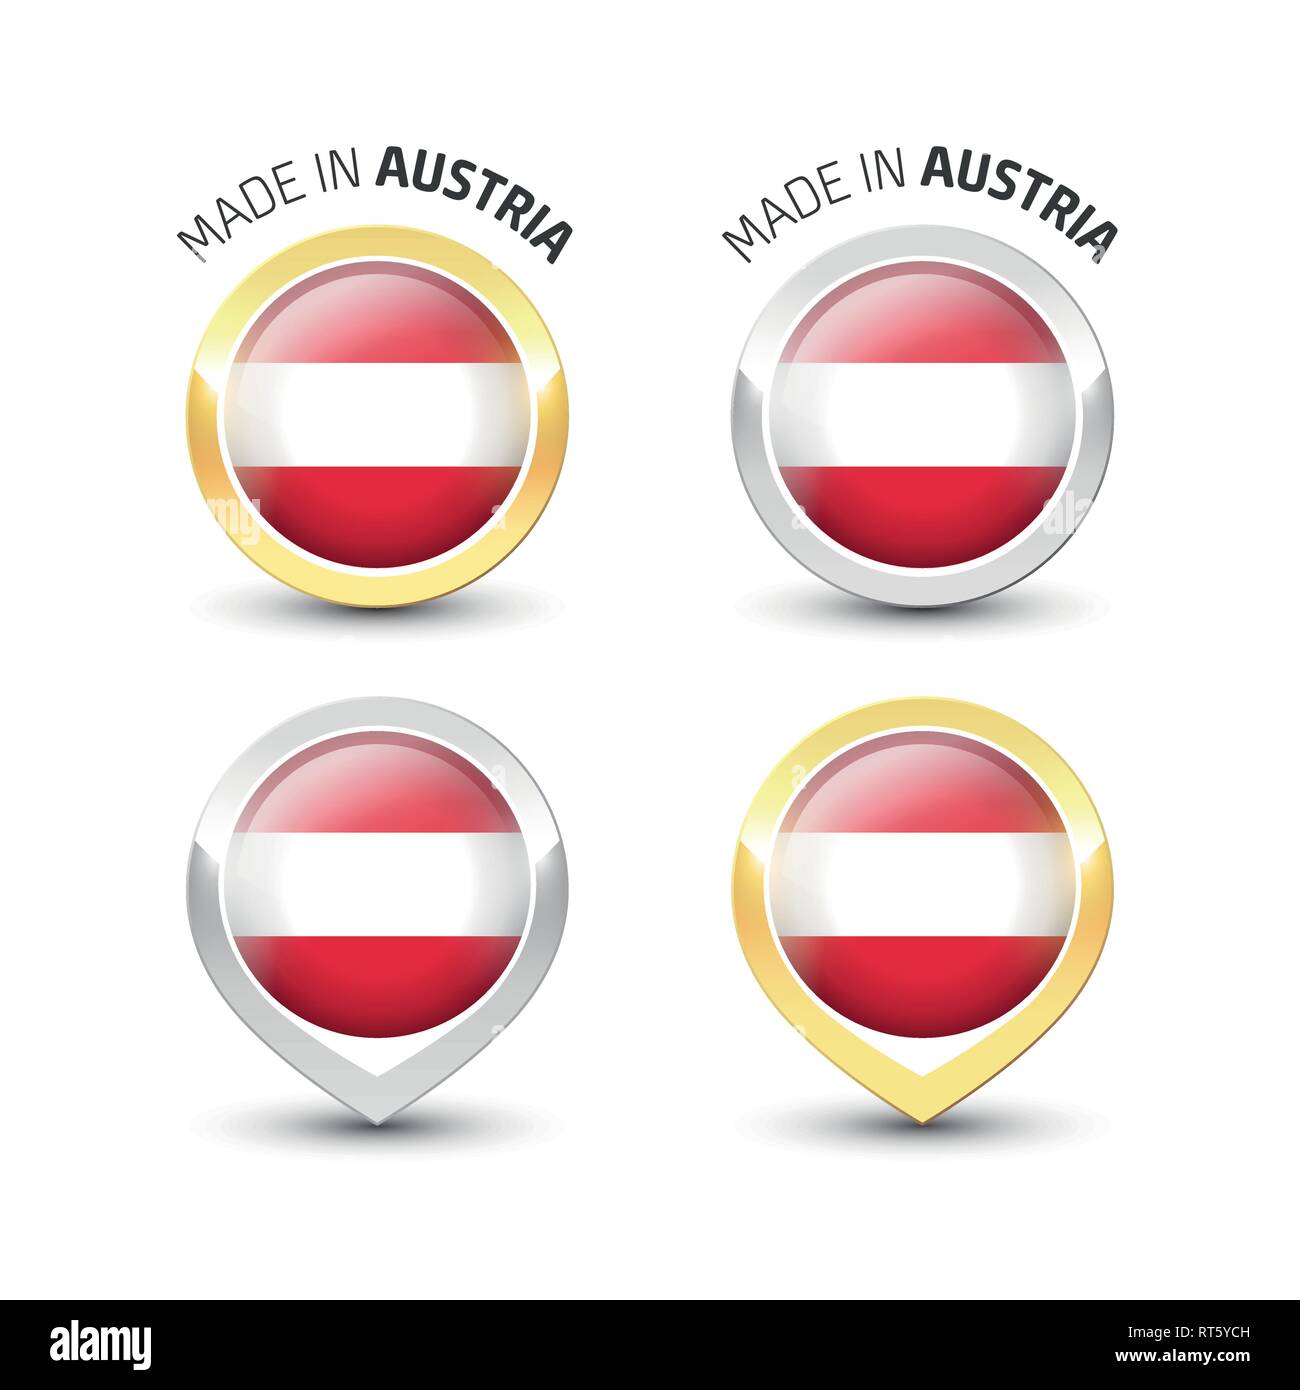 Made in Austria - Guarantee label with the Austrian flag inside round gold and silver icons. Stock Vector